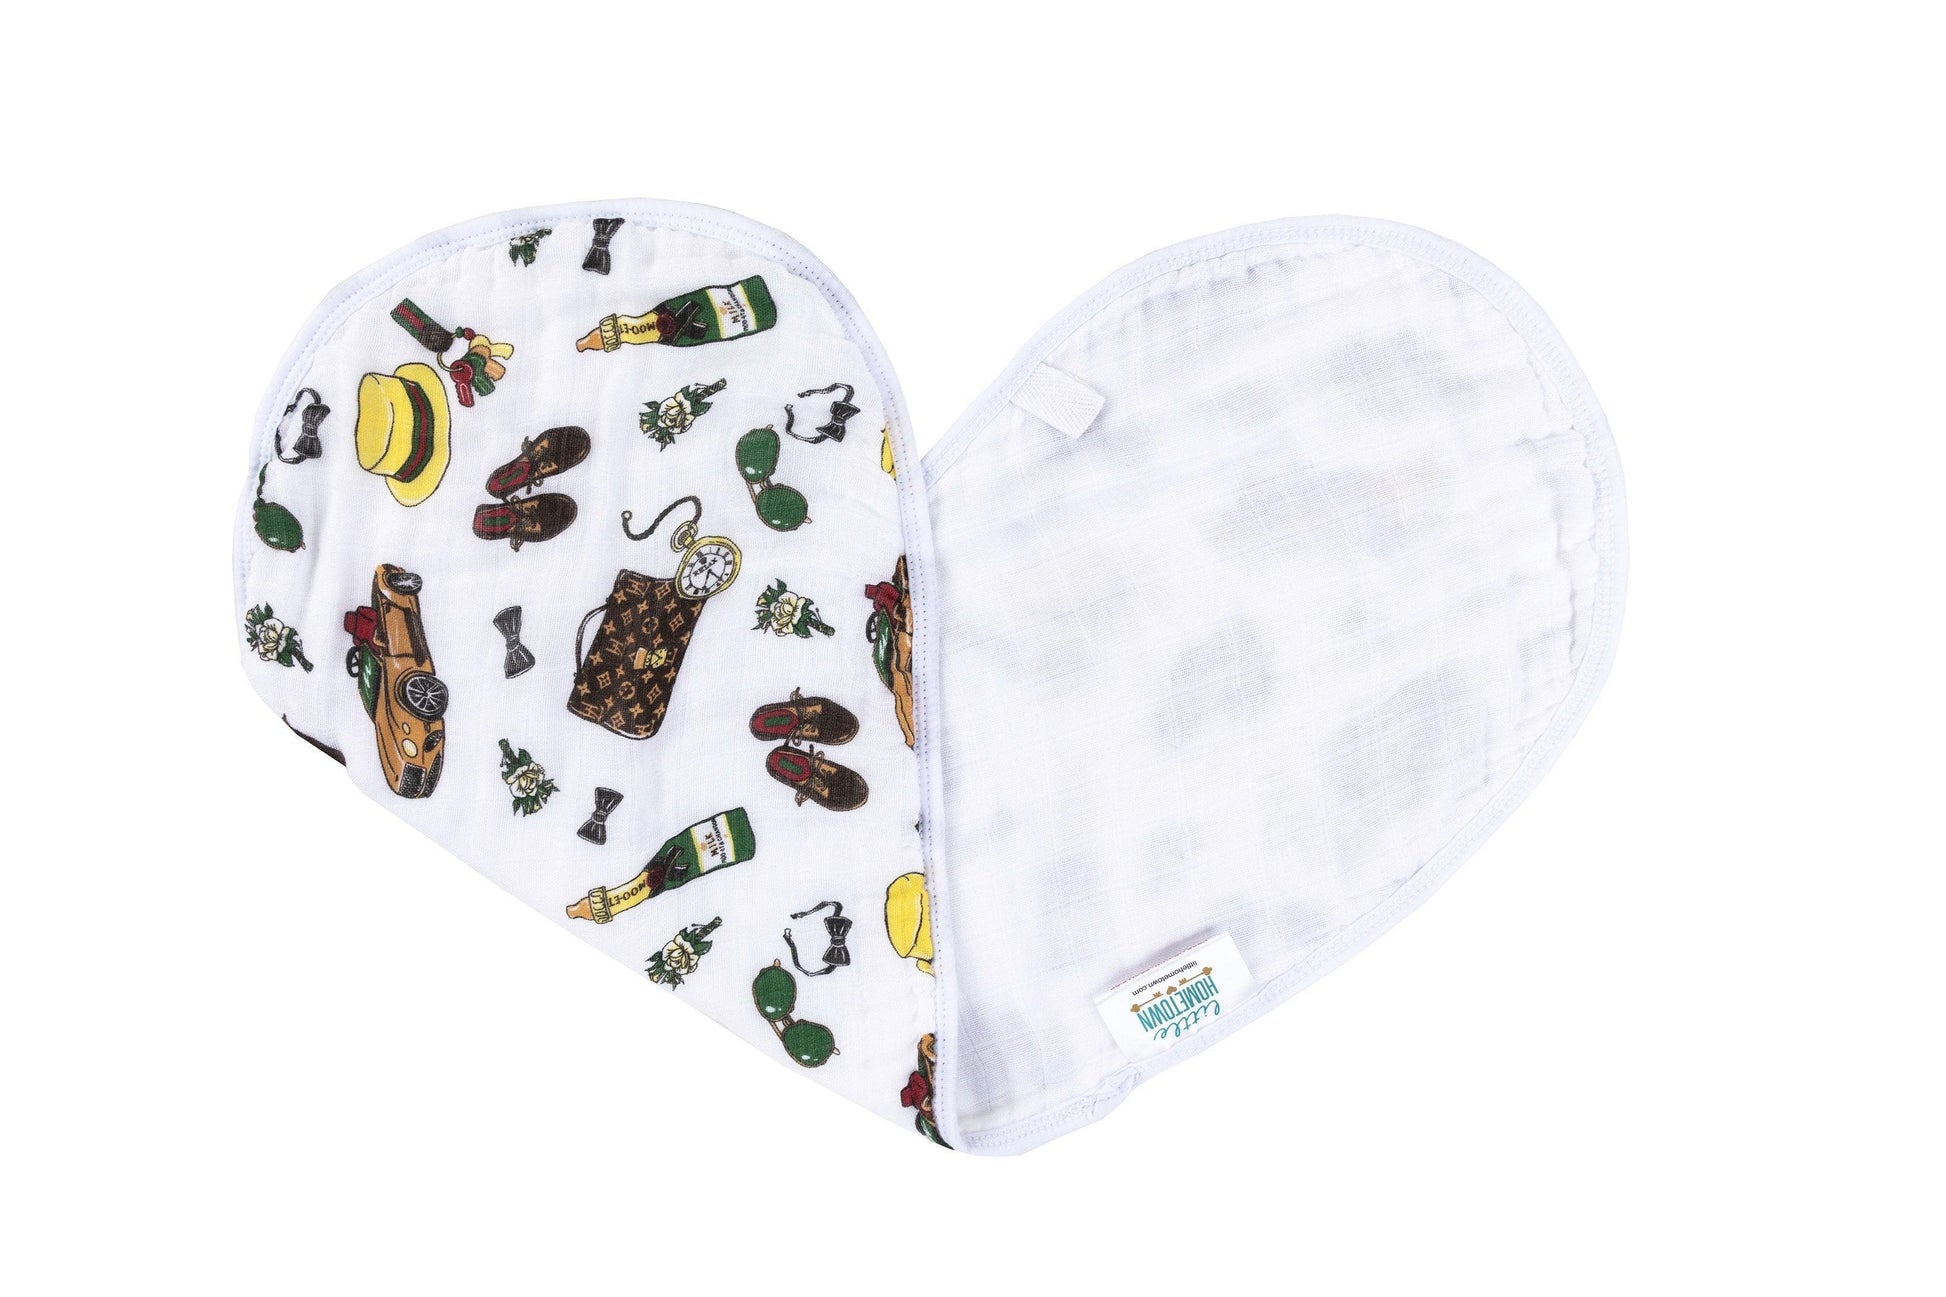 Baby muslin swaddle blanket and burp cloth set with "Dapper Napper" text, featuring a bow tie and mustache design.